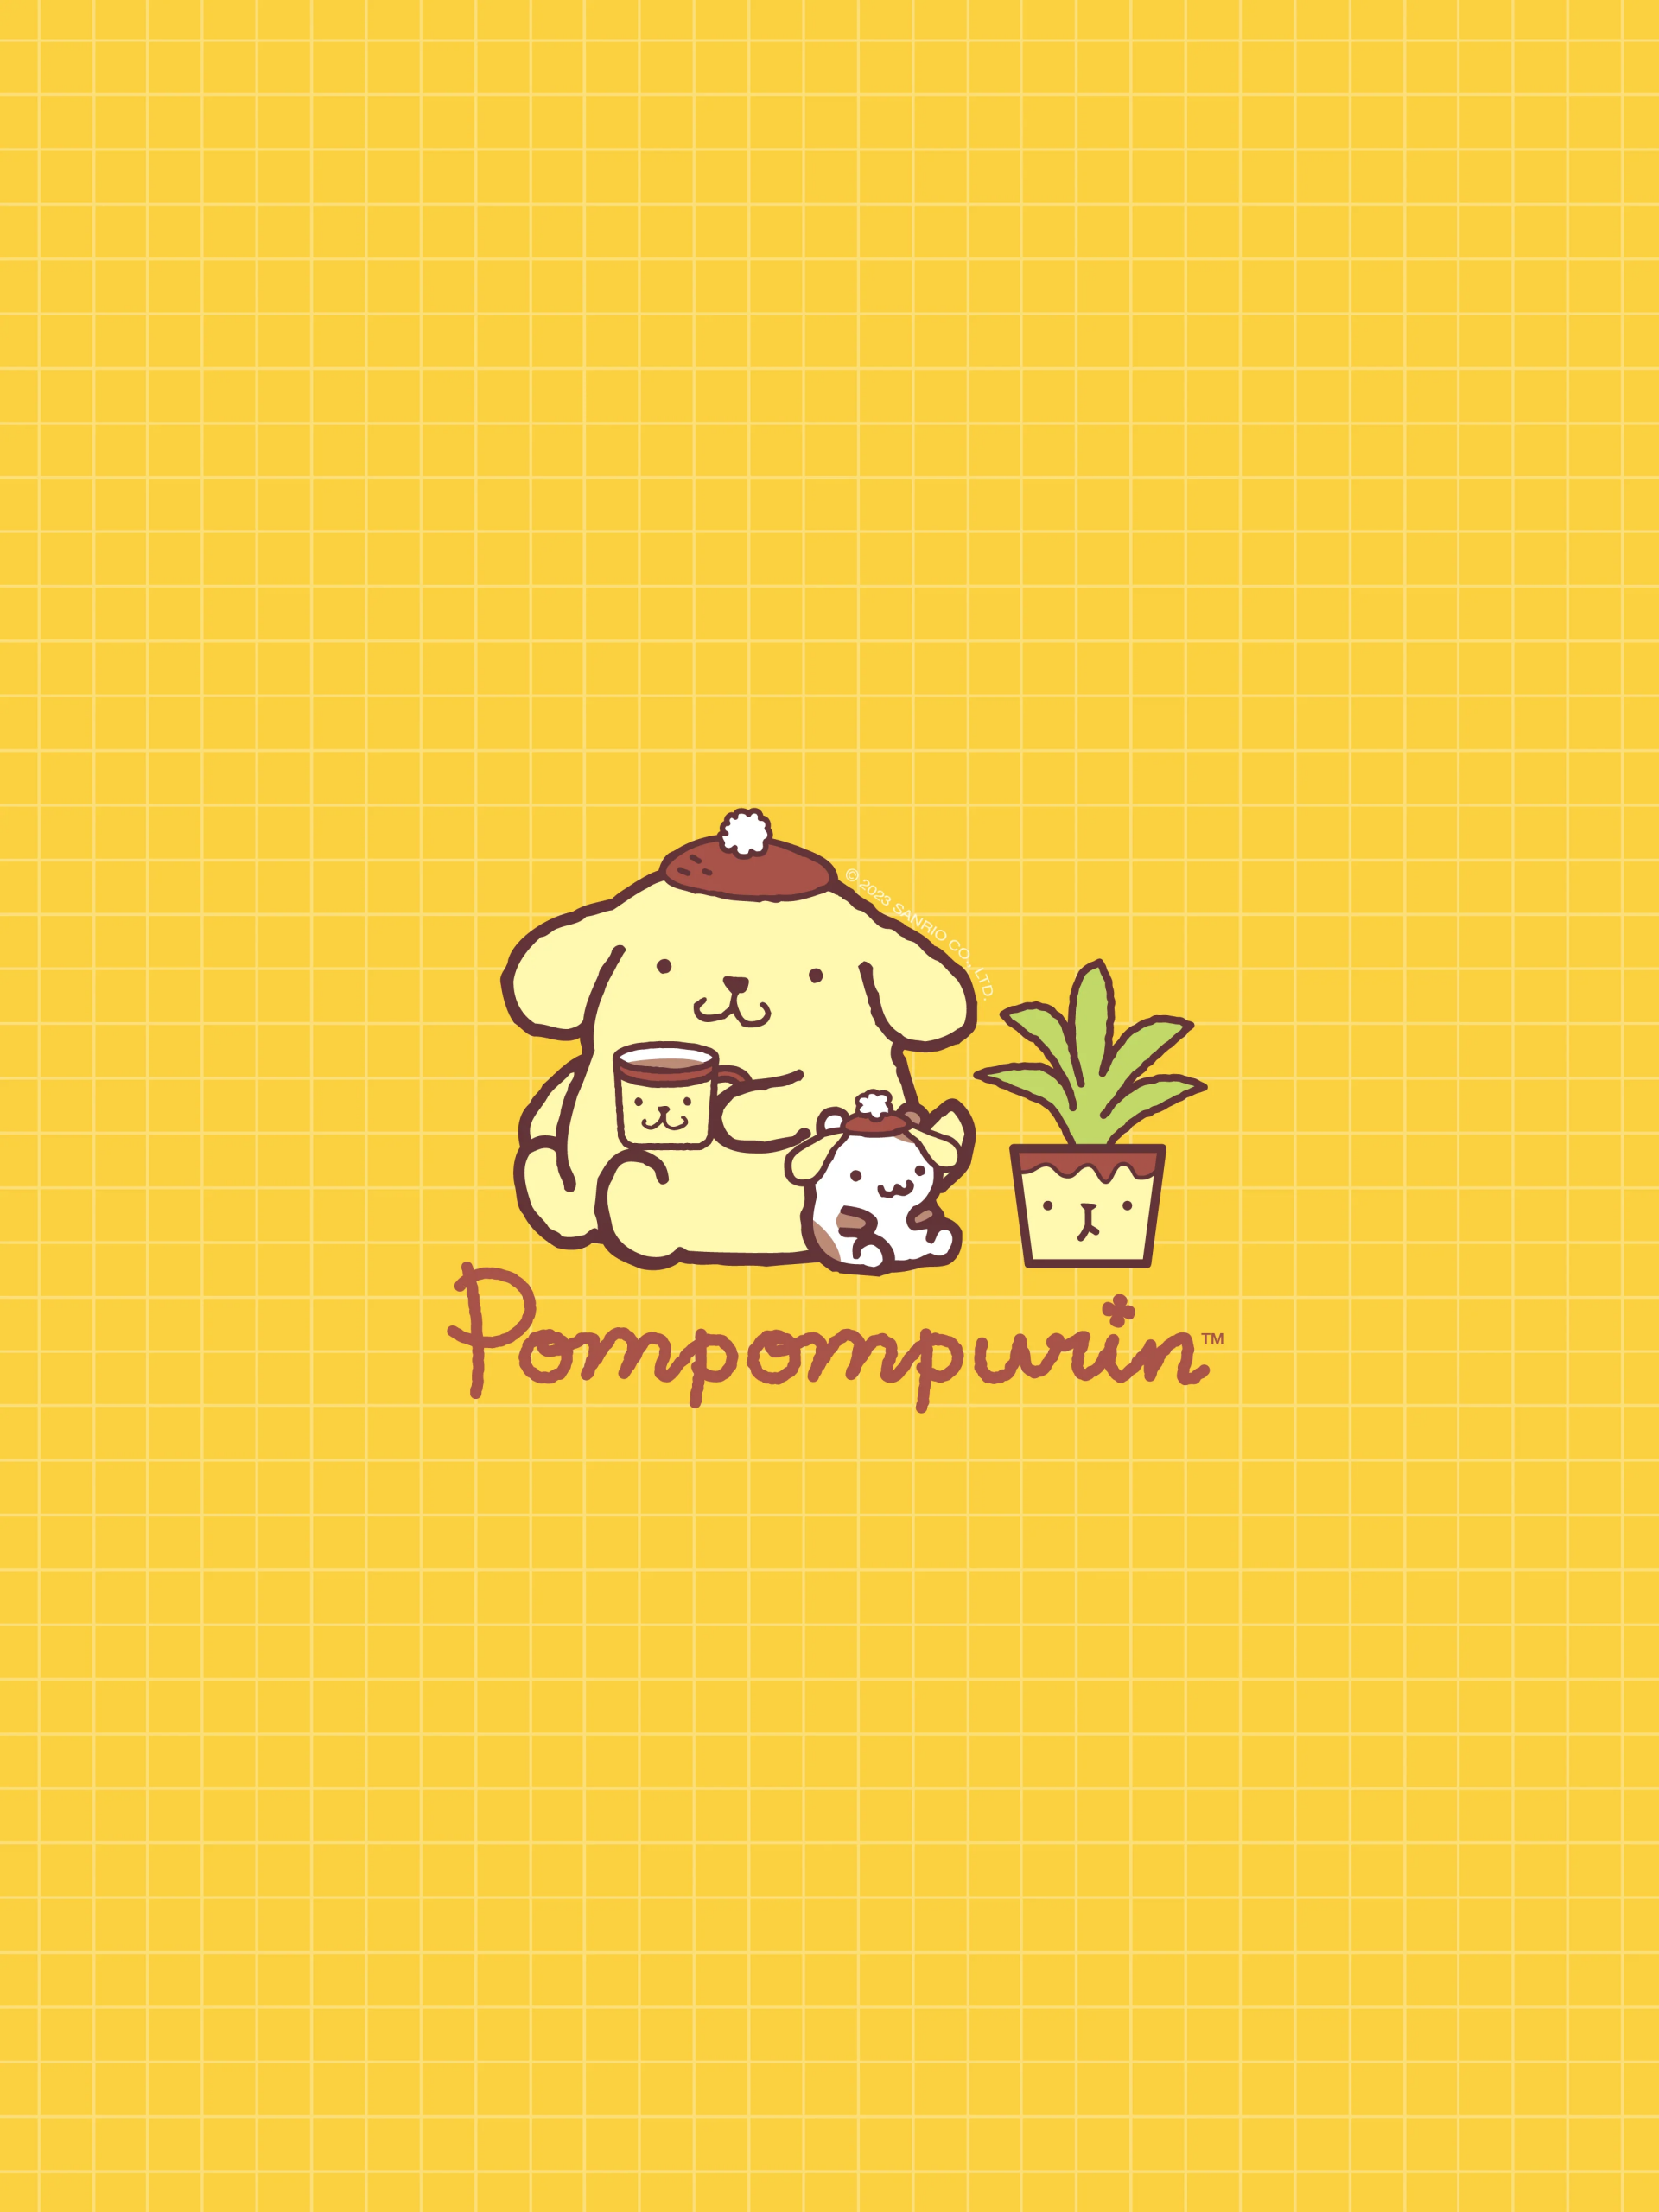 Cute Pompompurin and friends' illustration from Sanrio on a yellow background.